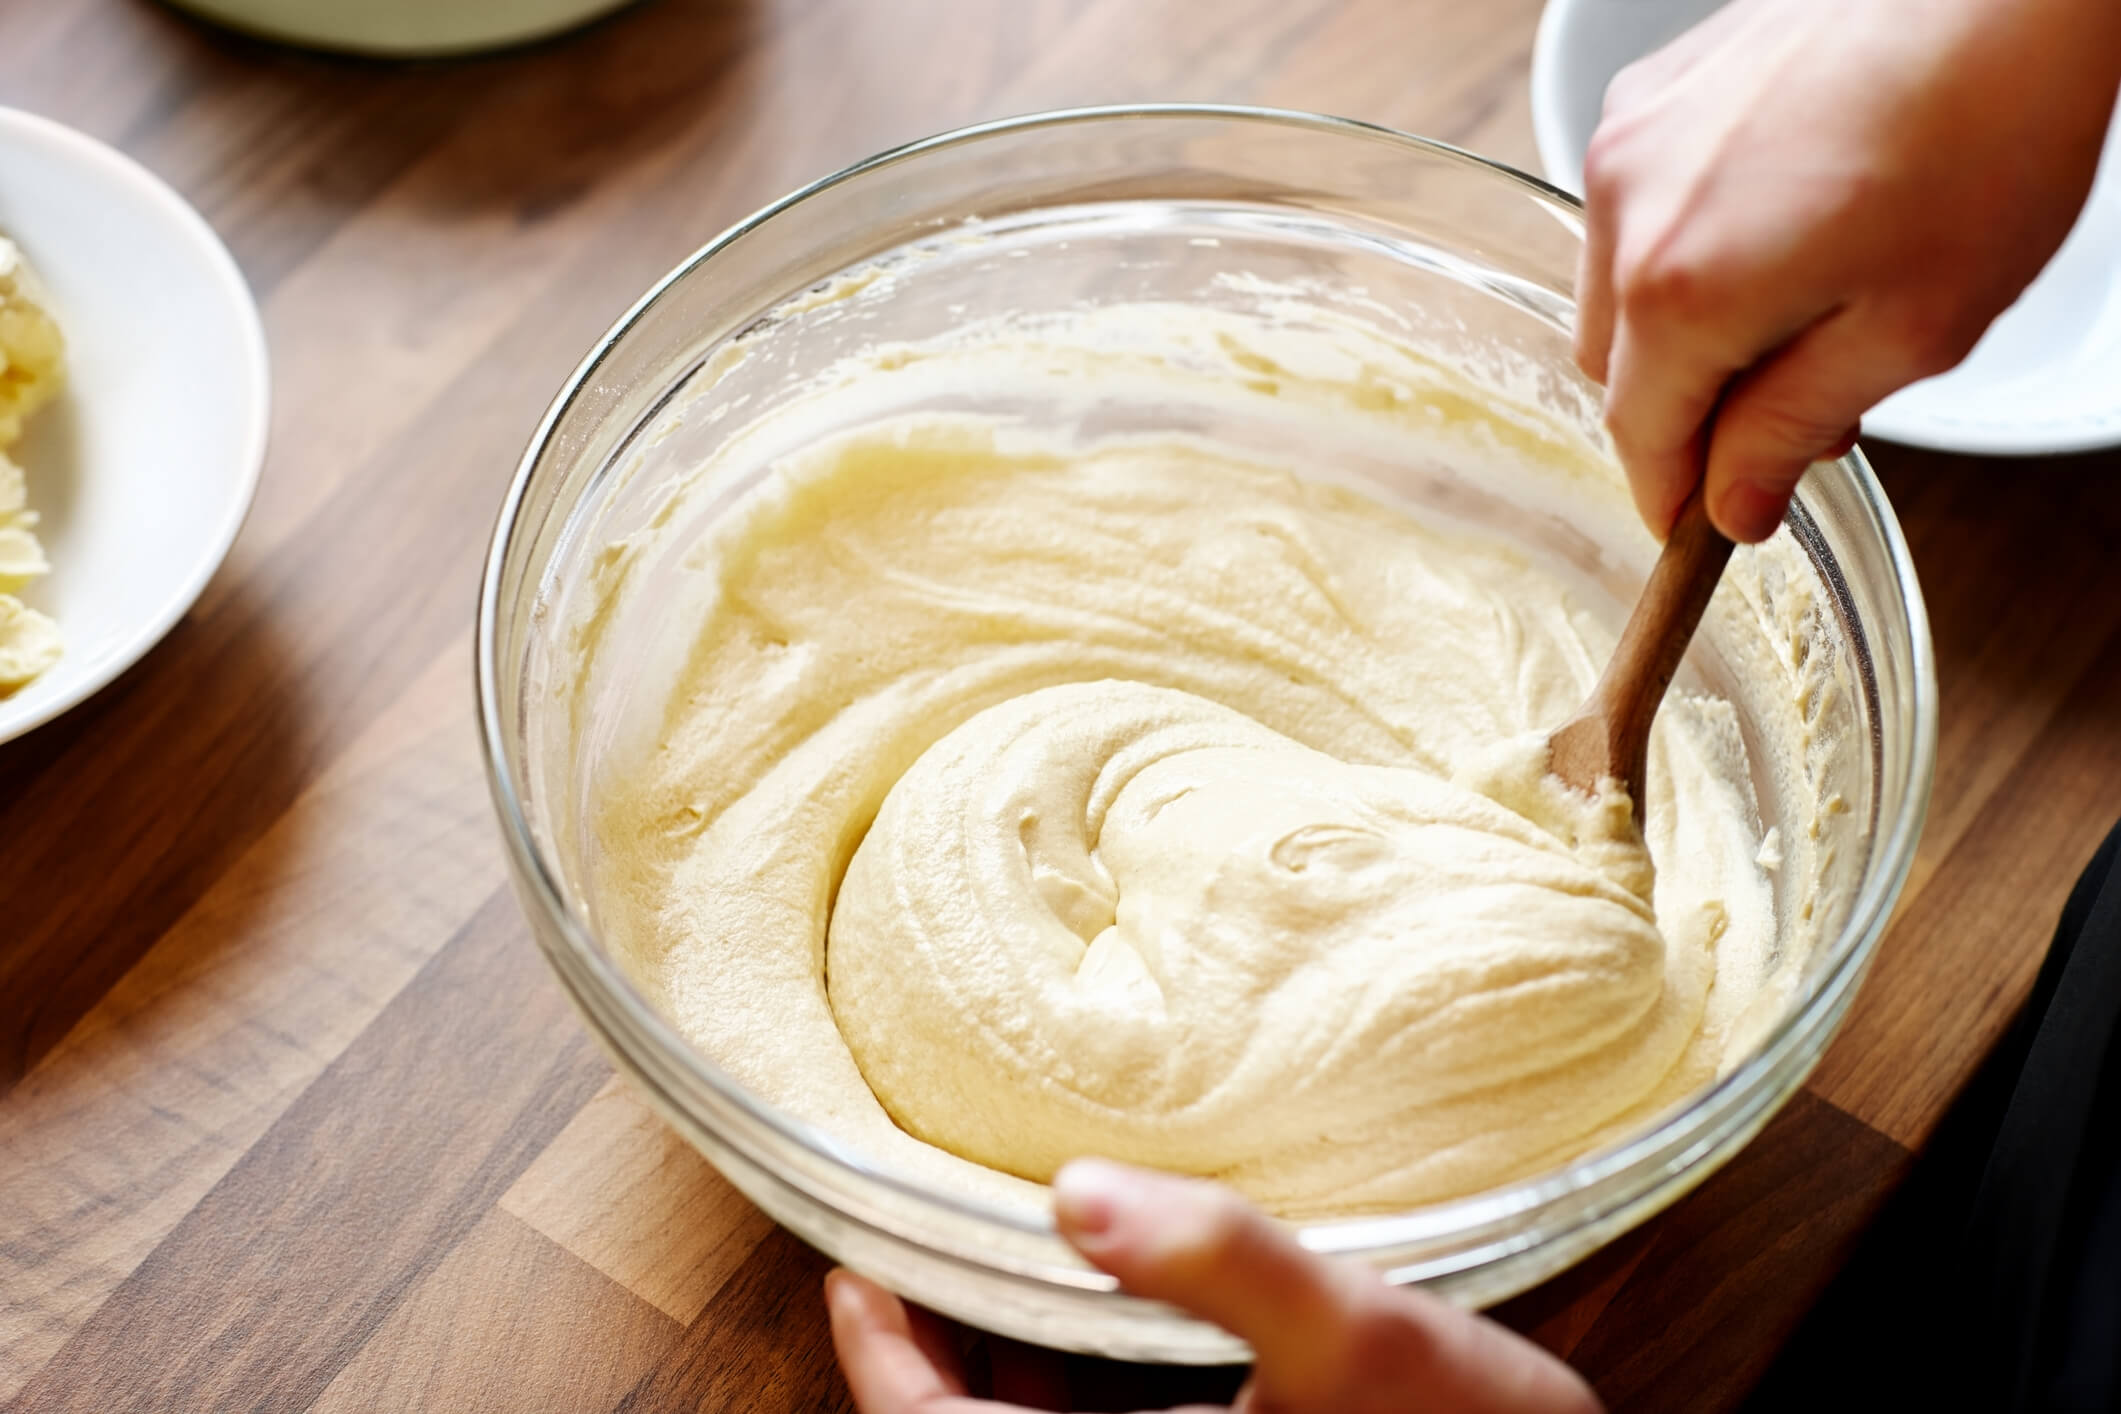 Mixing batter with a substituted ingredient to lighten up the recipe